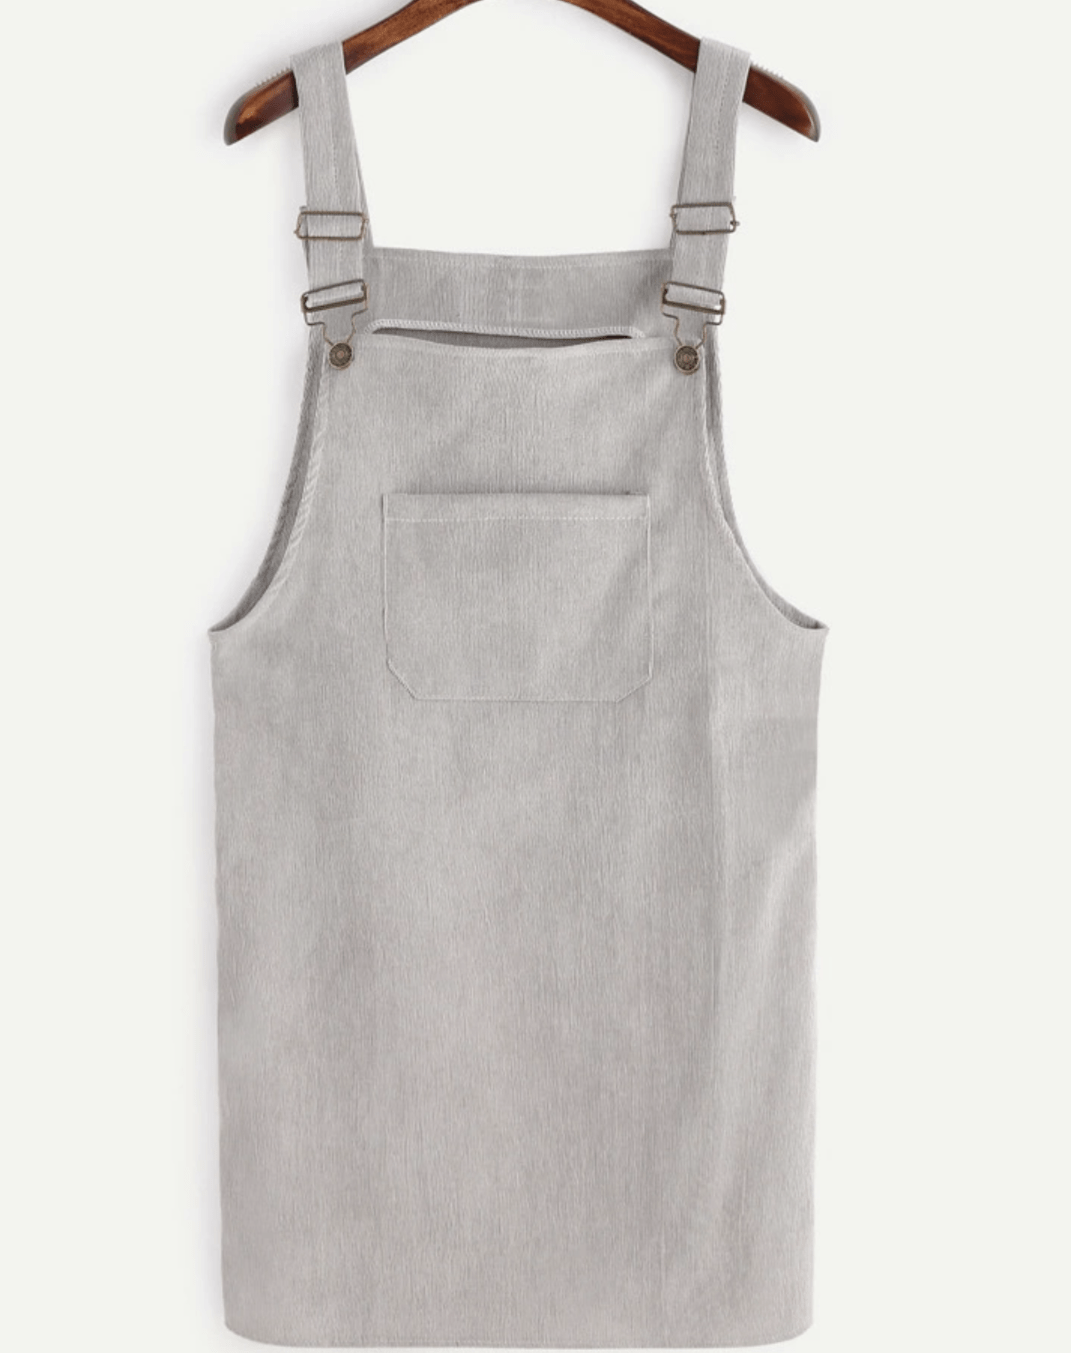 Front Pocket Corduroy Overall Dress - Made For Her Label